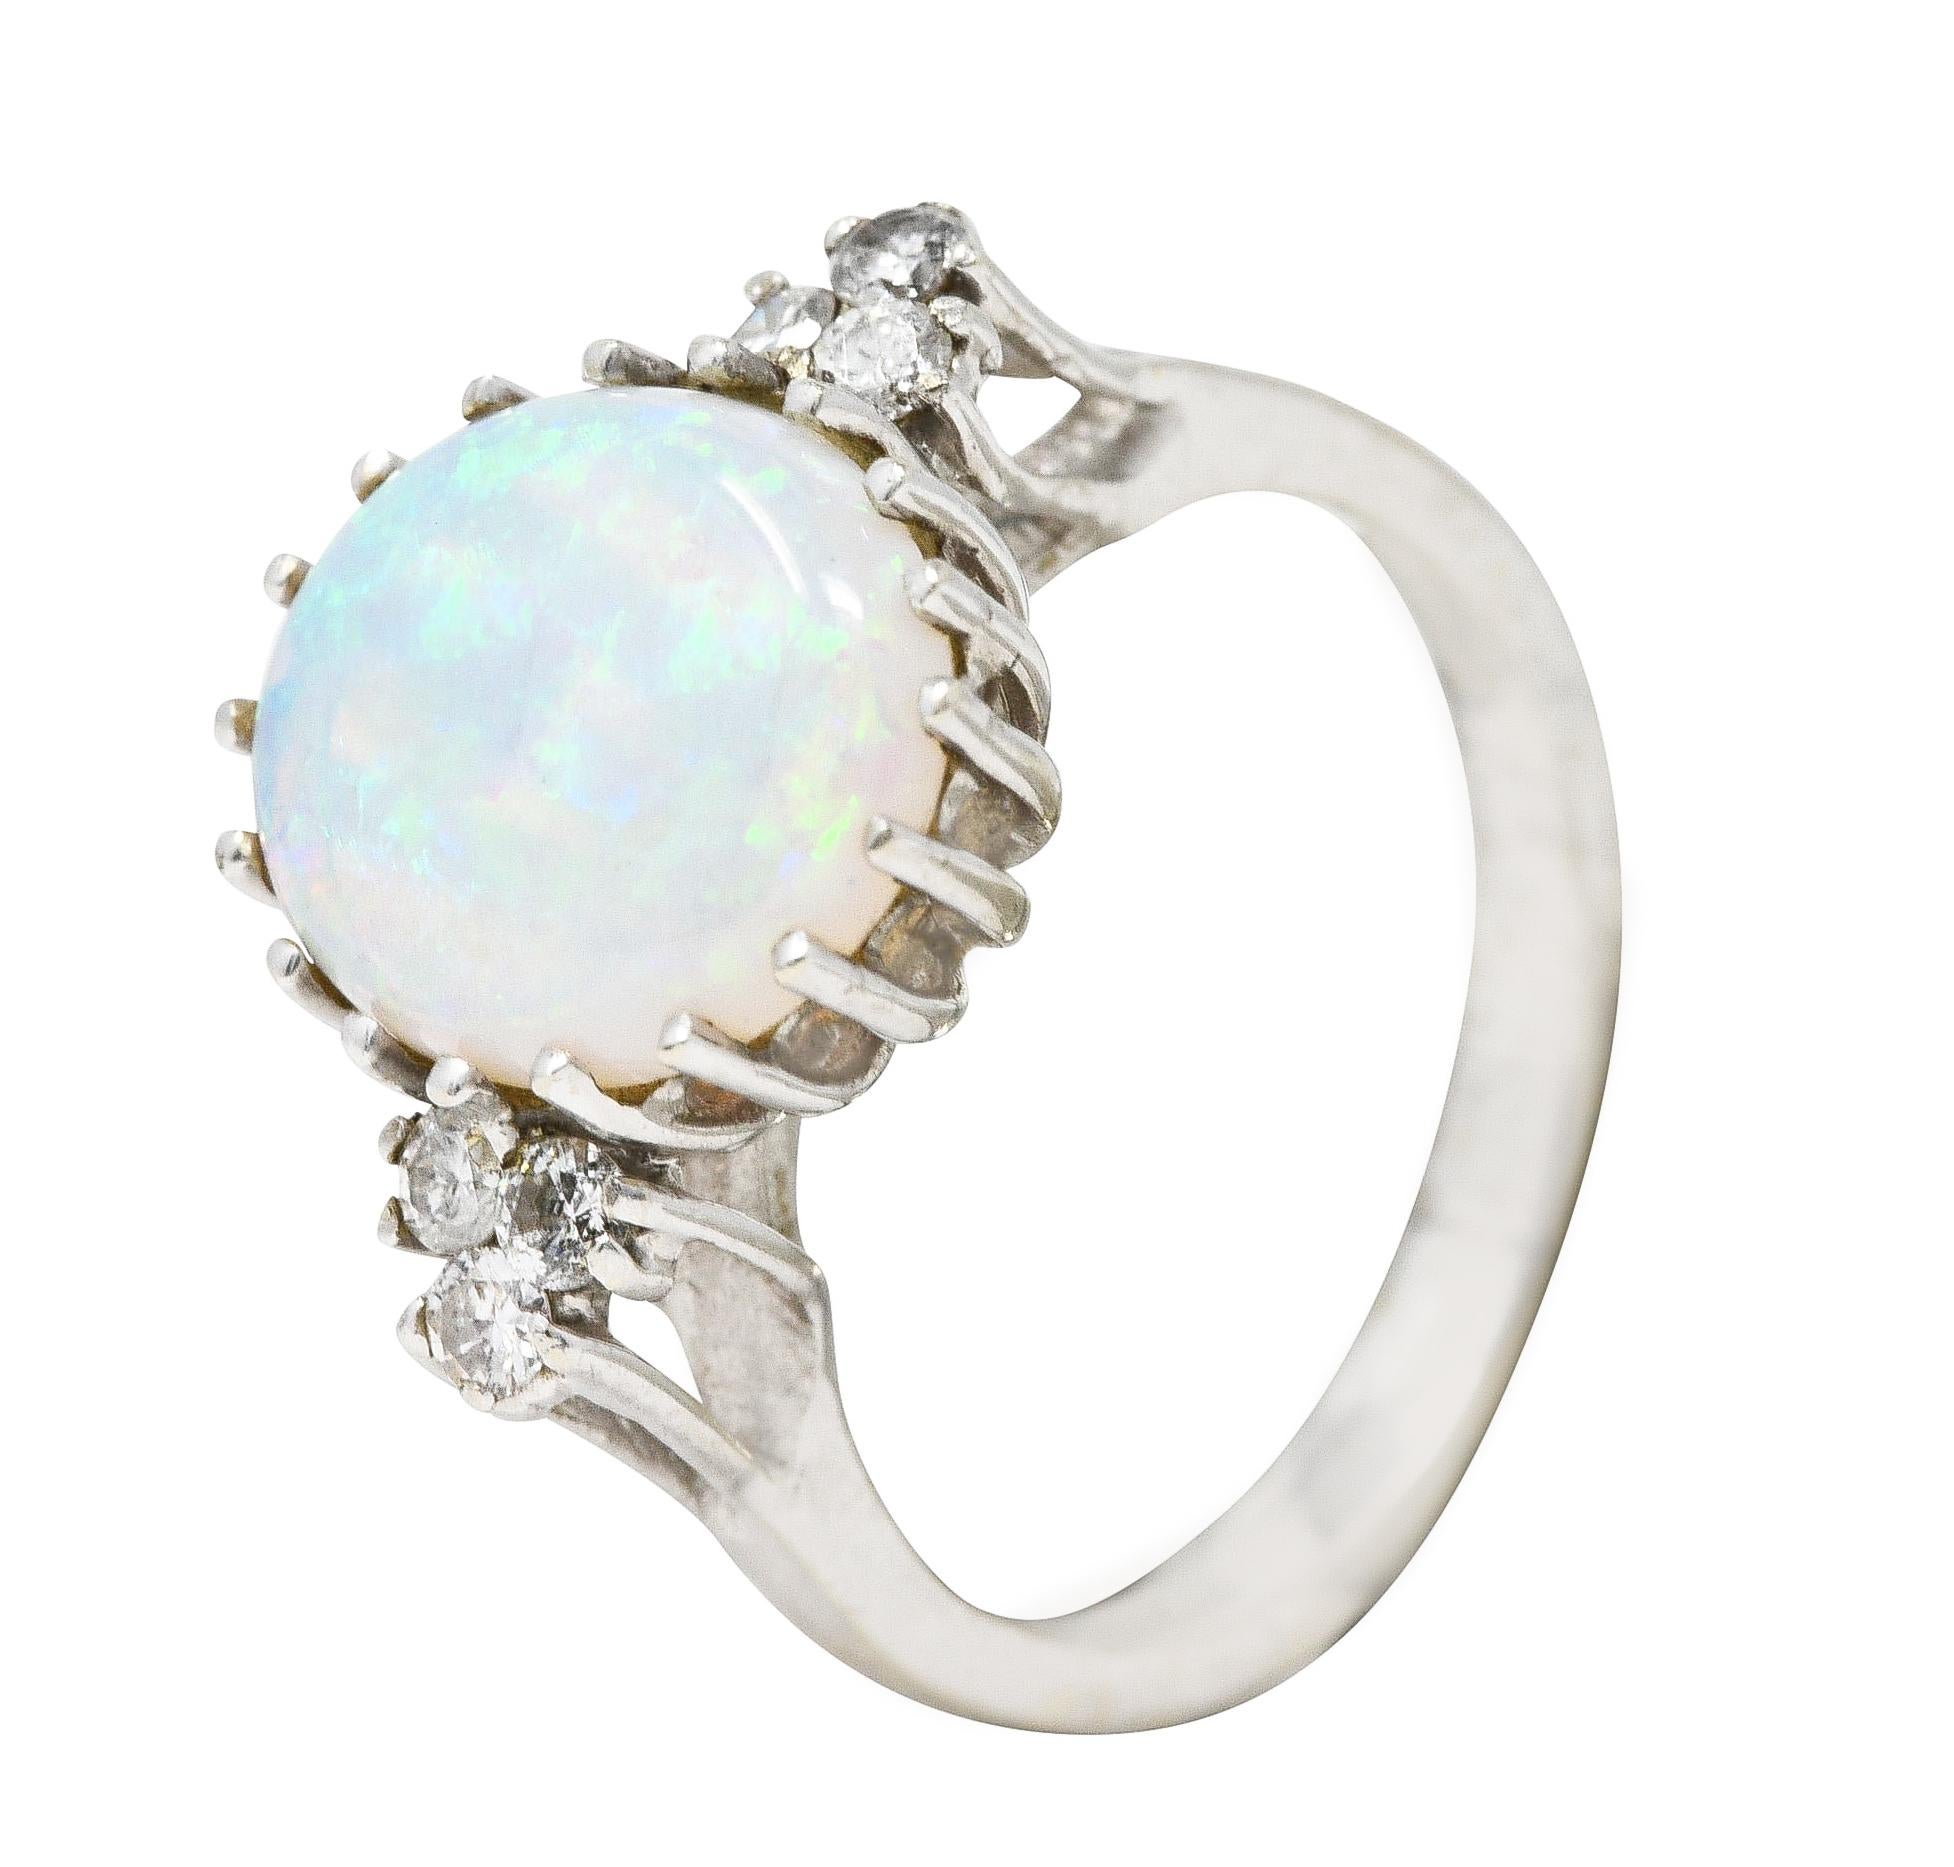 Centering an oval opal cabochon measuring 9.0 x 11.0 mm. Translucent white in body color with spectral play-of-color. Prong set in wire basket and flanked by cathedral shoulders. With clustered round brilliant cut diamonds. Prong set and weighing